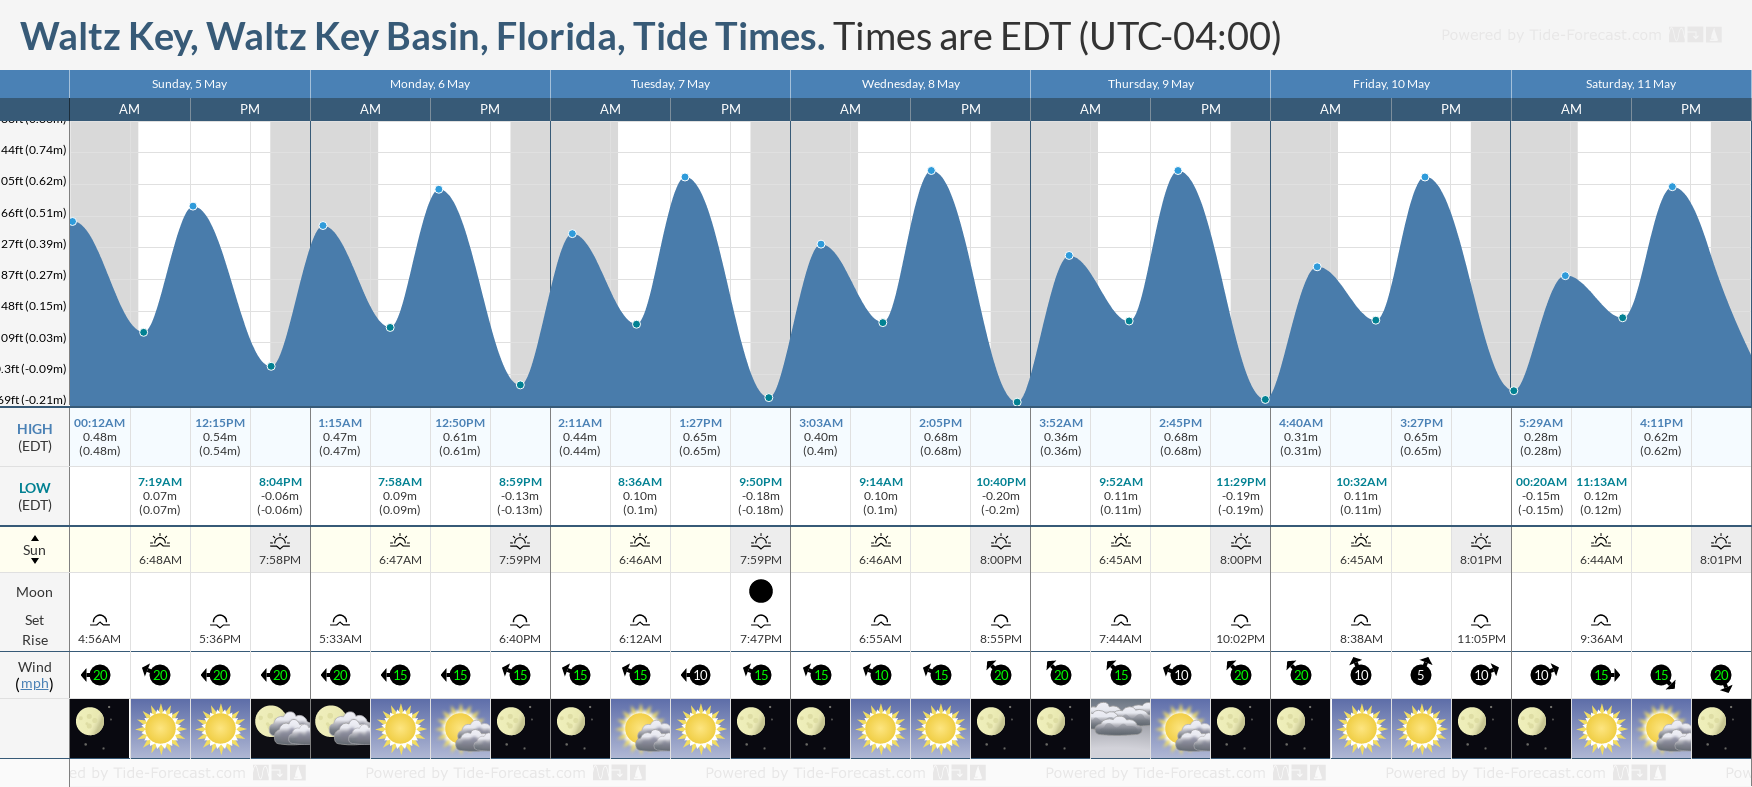 Waltz Key, Waltz Key Basin, Florida Tide Chart including high and low tide times for the next 7 days